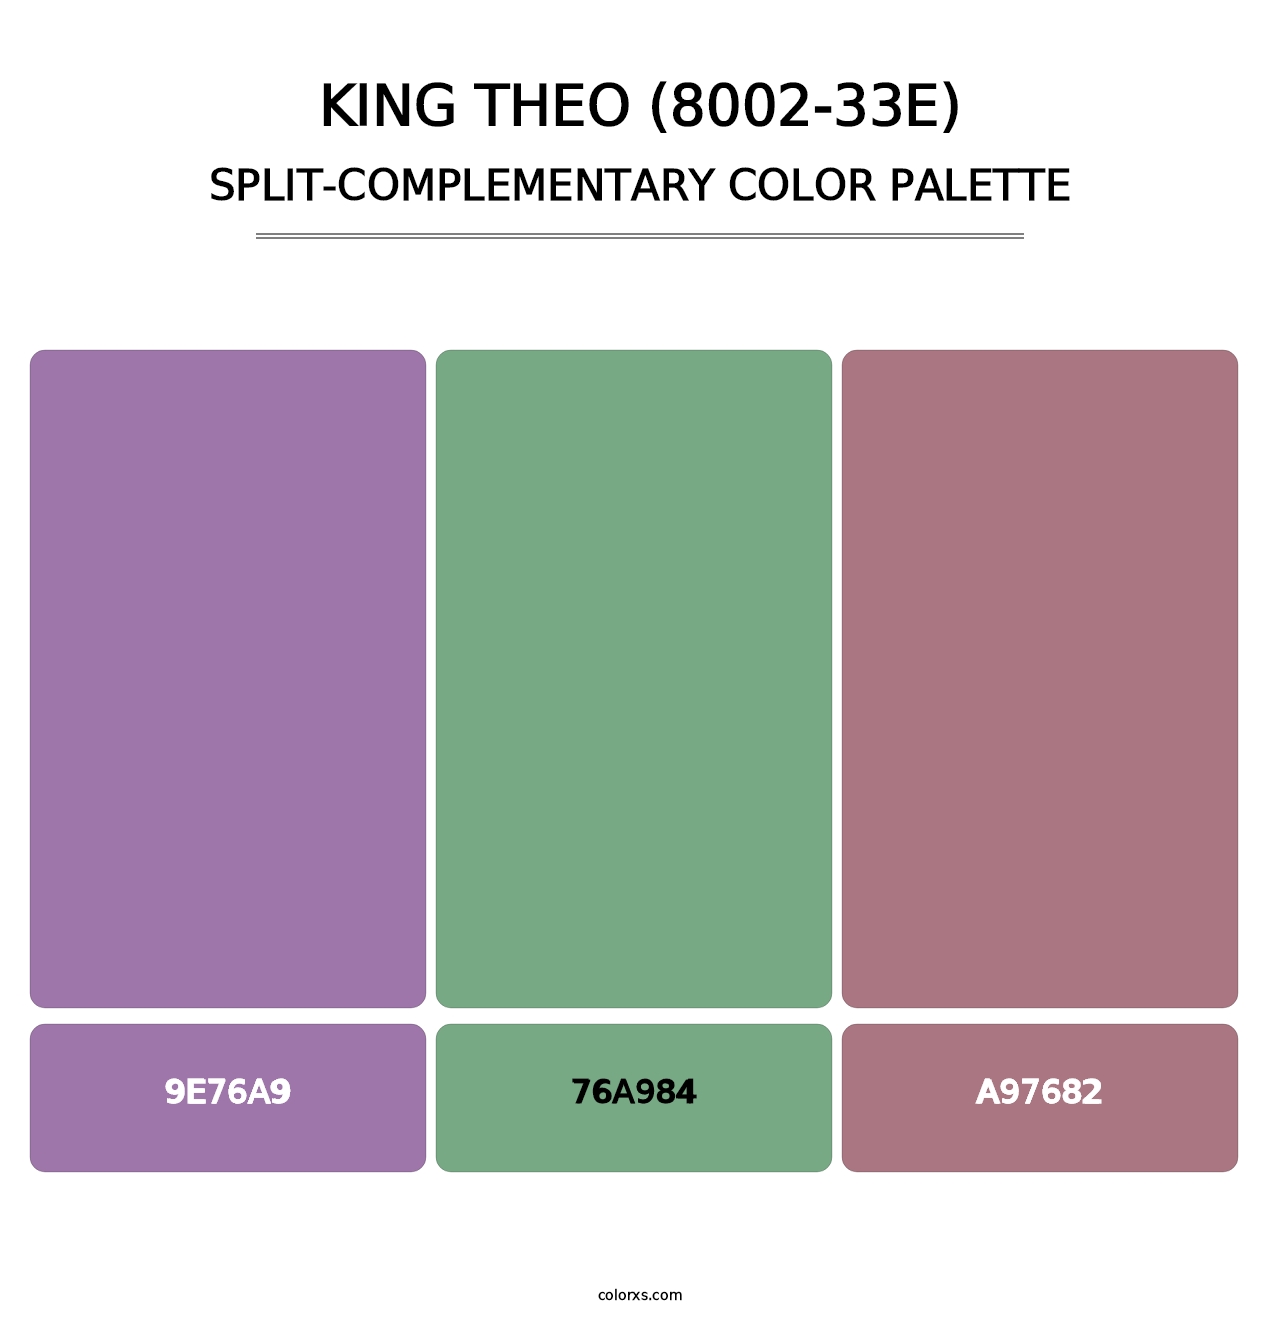 King Theo (8002-33E) - Split-Complementary Color Palette